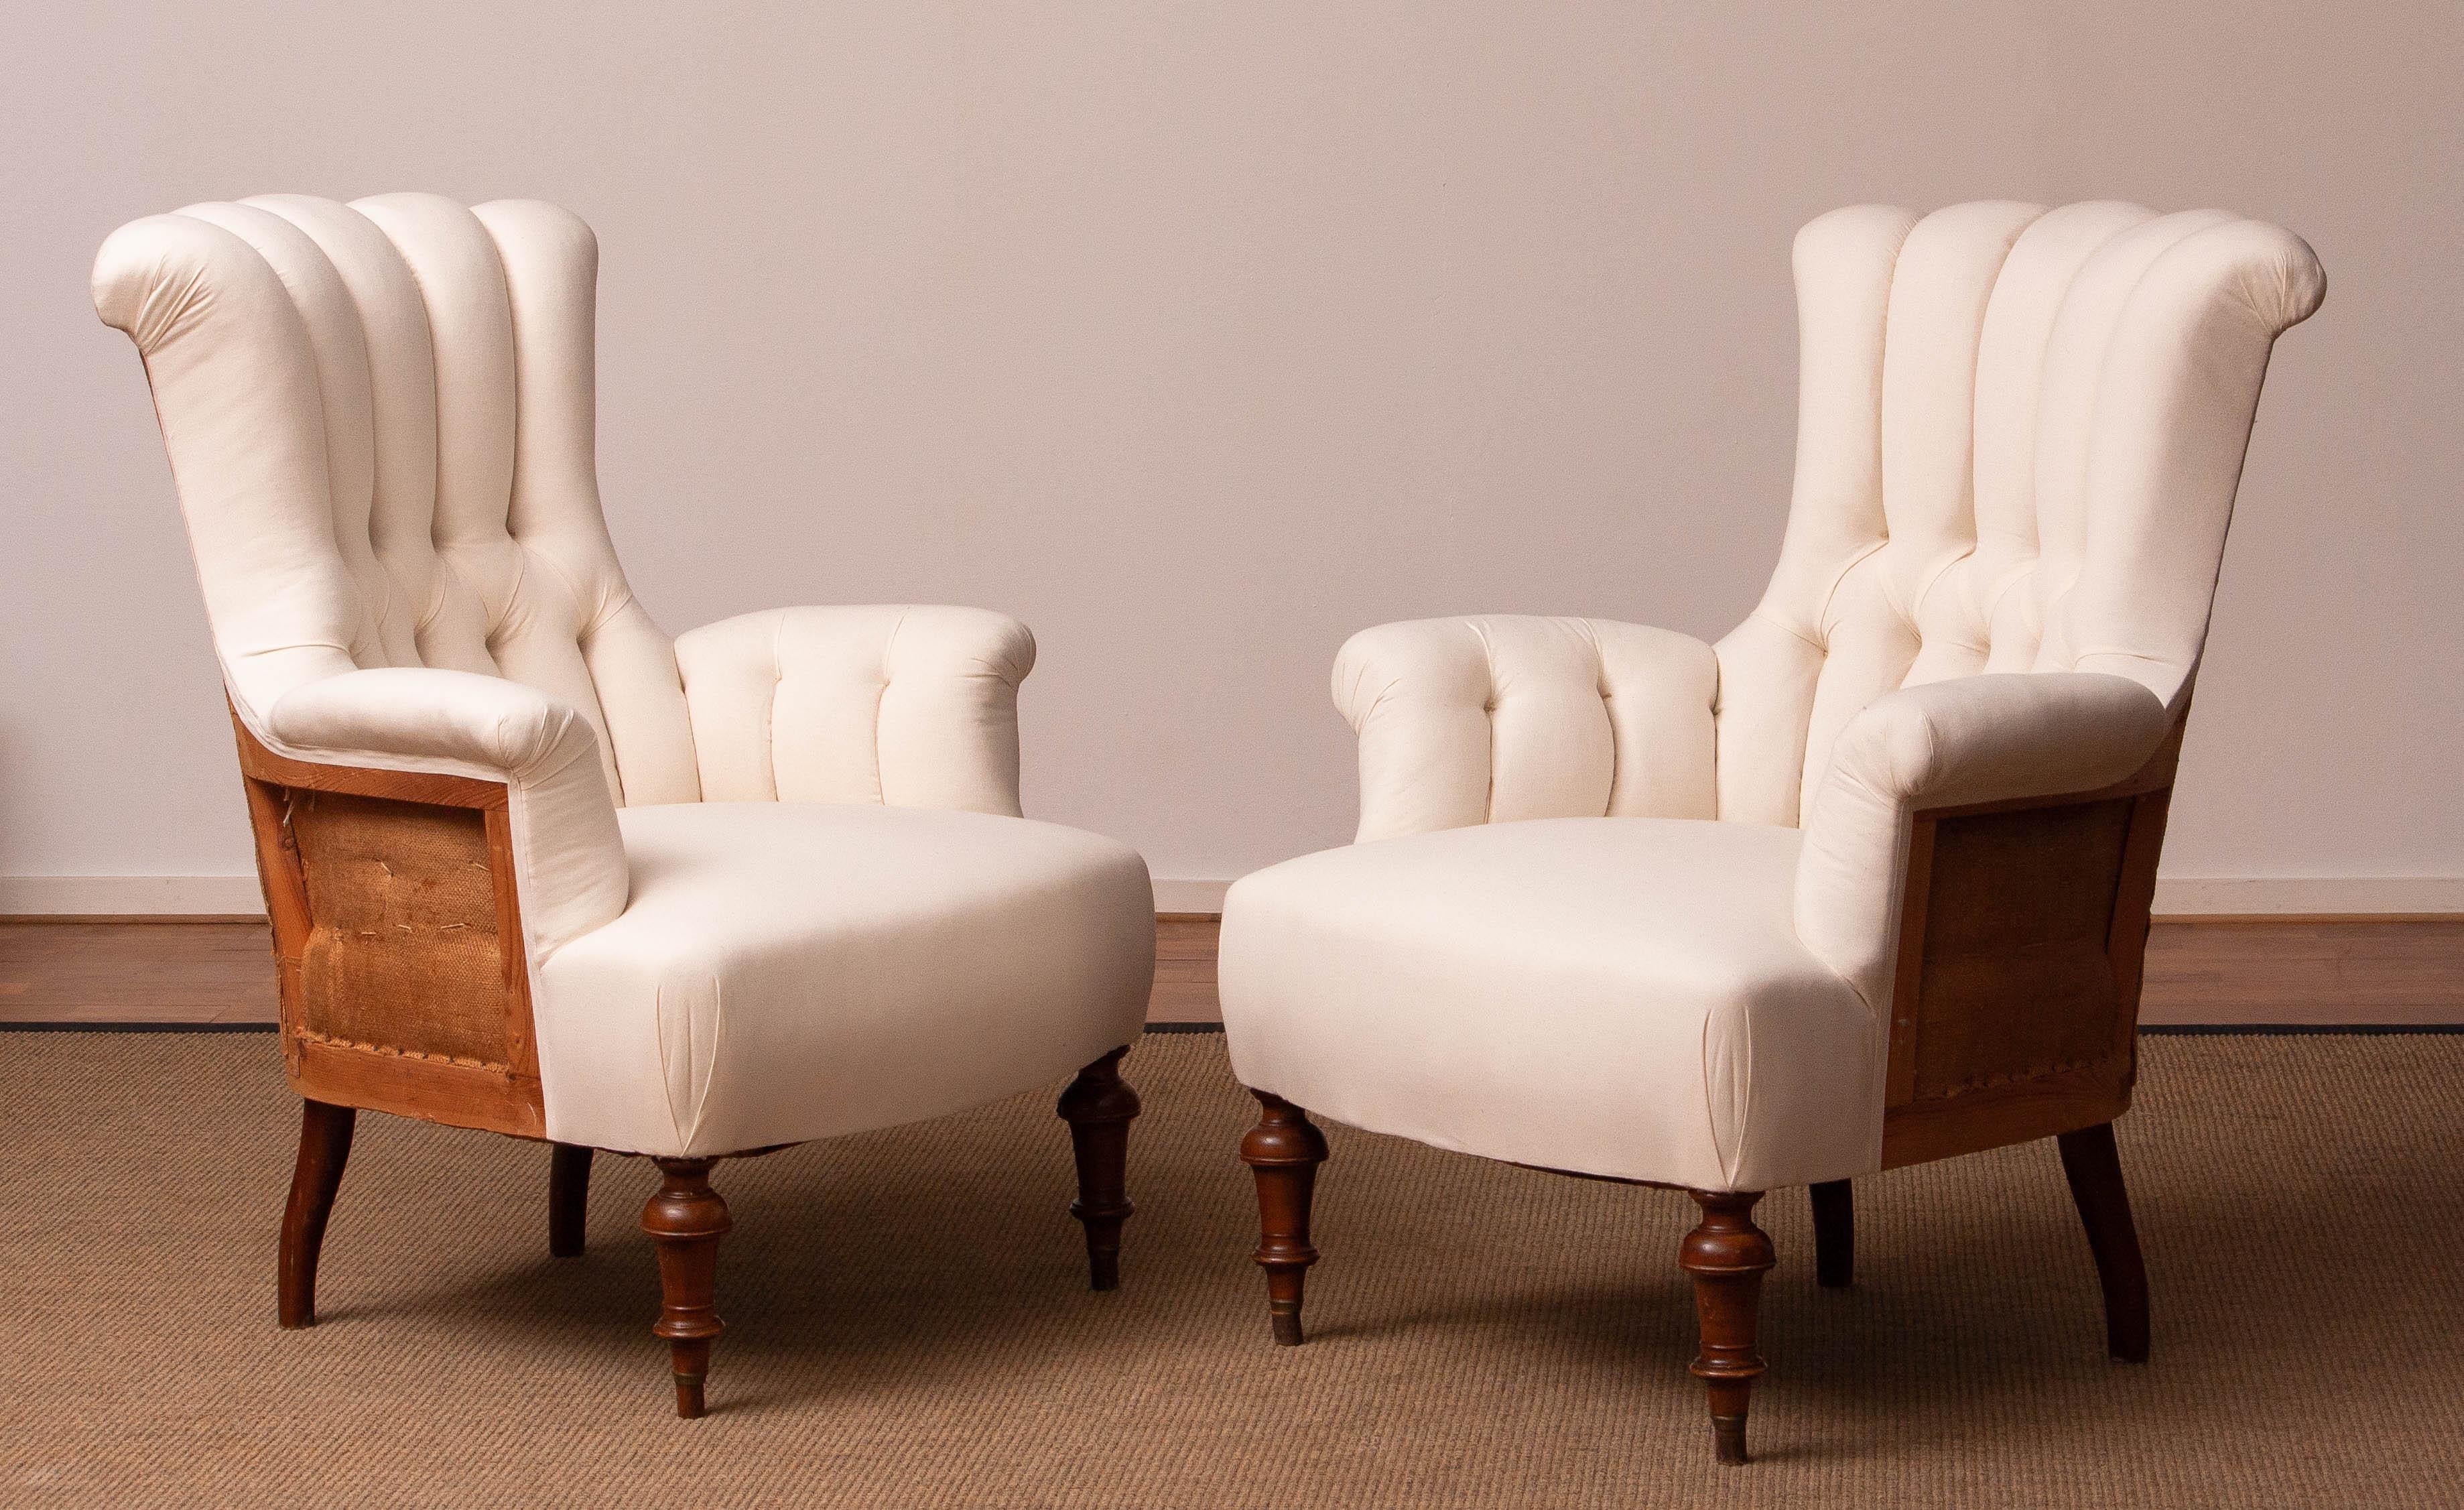 19th Century White Cotton Victorian 'Deconstructed' Tufted Scroll-Back Chair For Sale 5